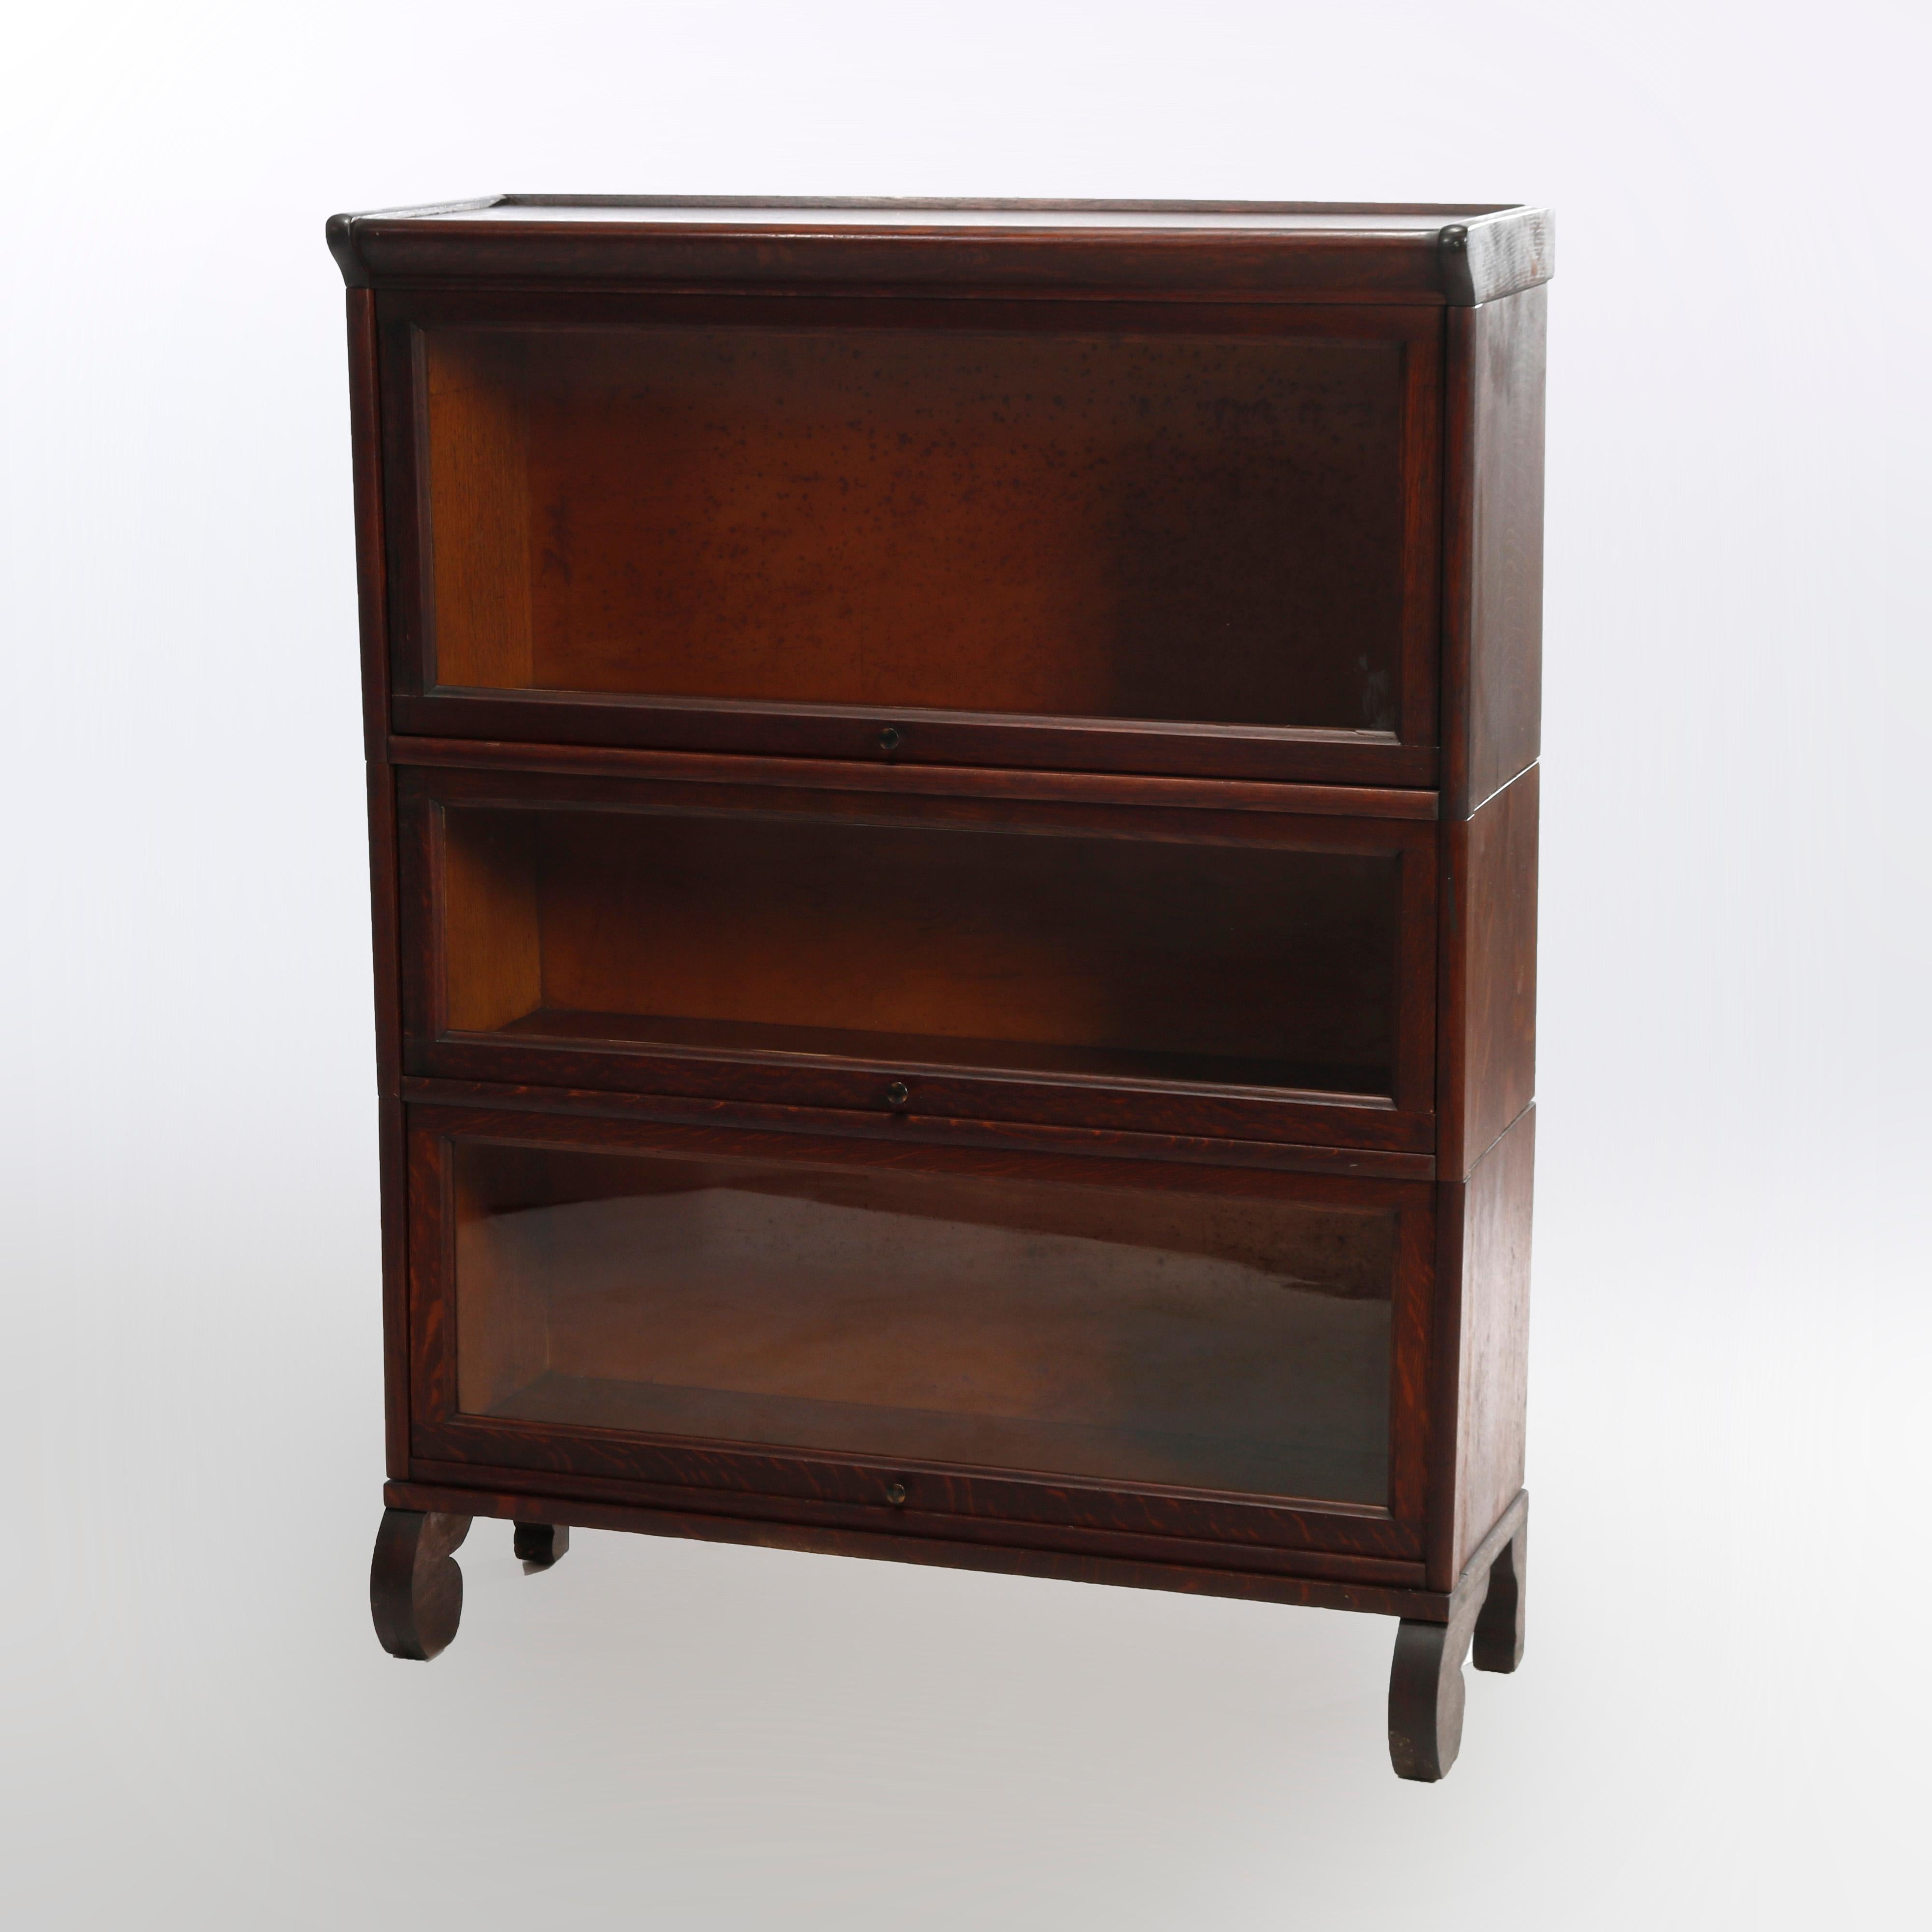 An antique Arts & Crafts Mission barrister bookcase in the manner of Globe Wernicke offers quarter sawn oak construction with three stacks, each having pull-out glass doors, and raised on scroll form legs, c1910

Measures - 45''H X 34.25''W X